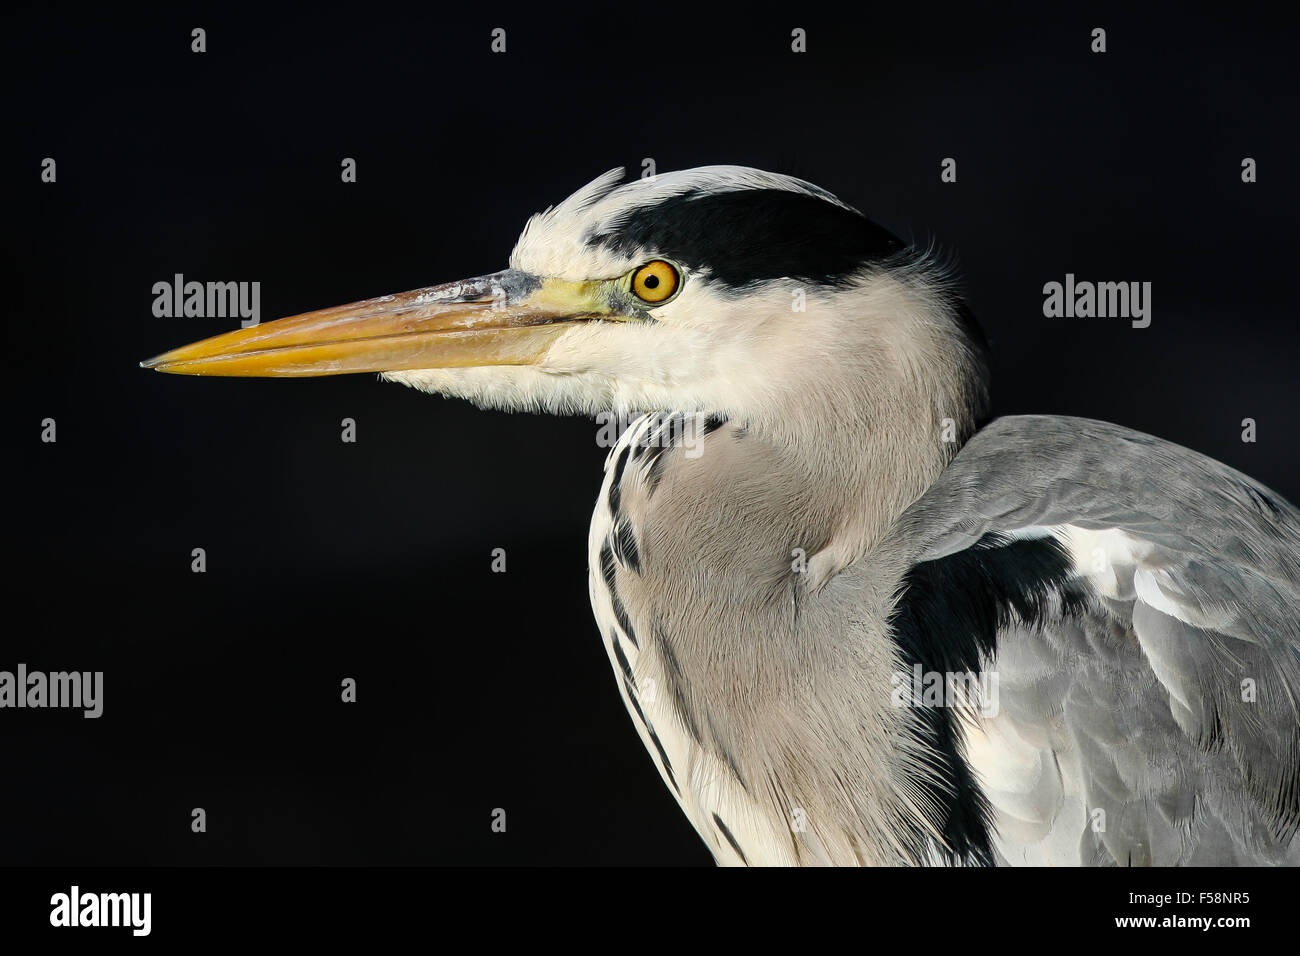 head and shoulders close up of a grey heron against a black background. Stock Photo